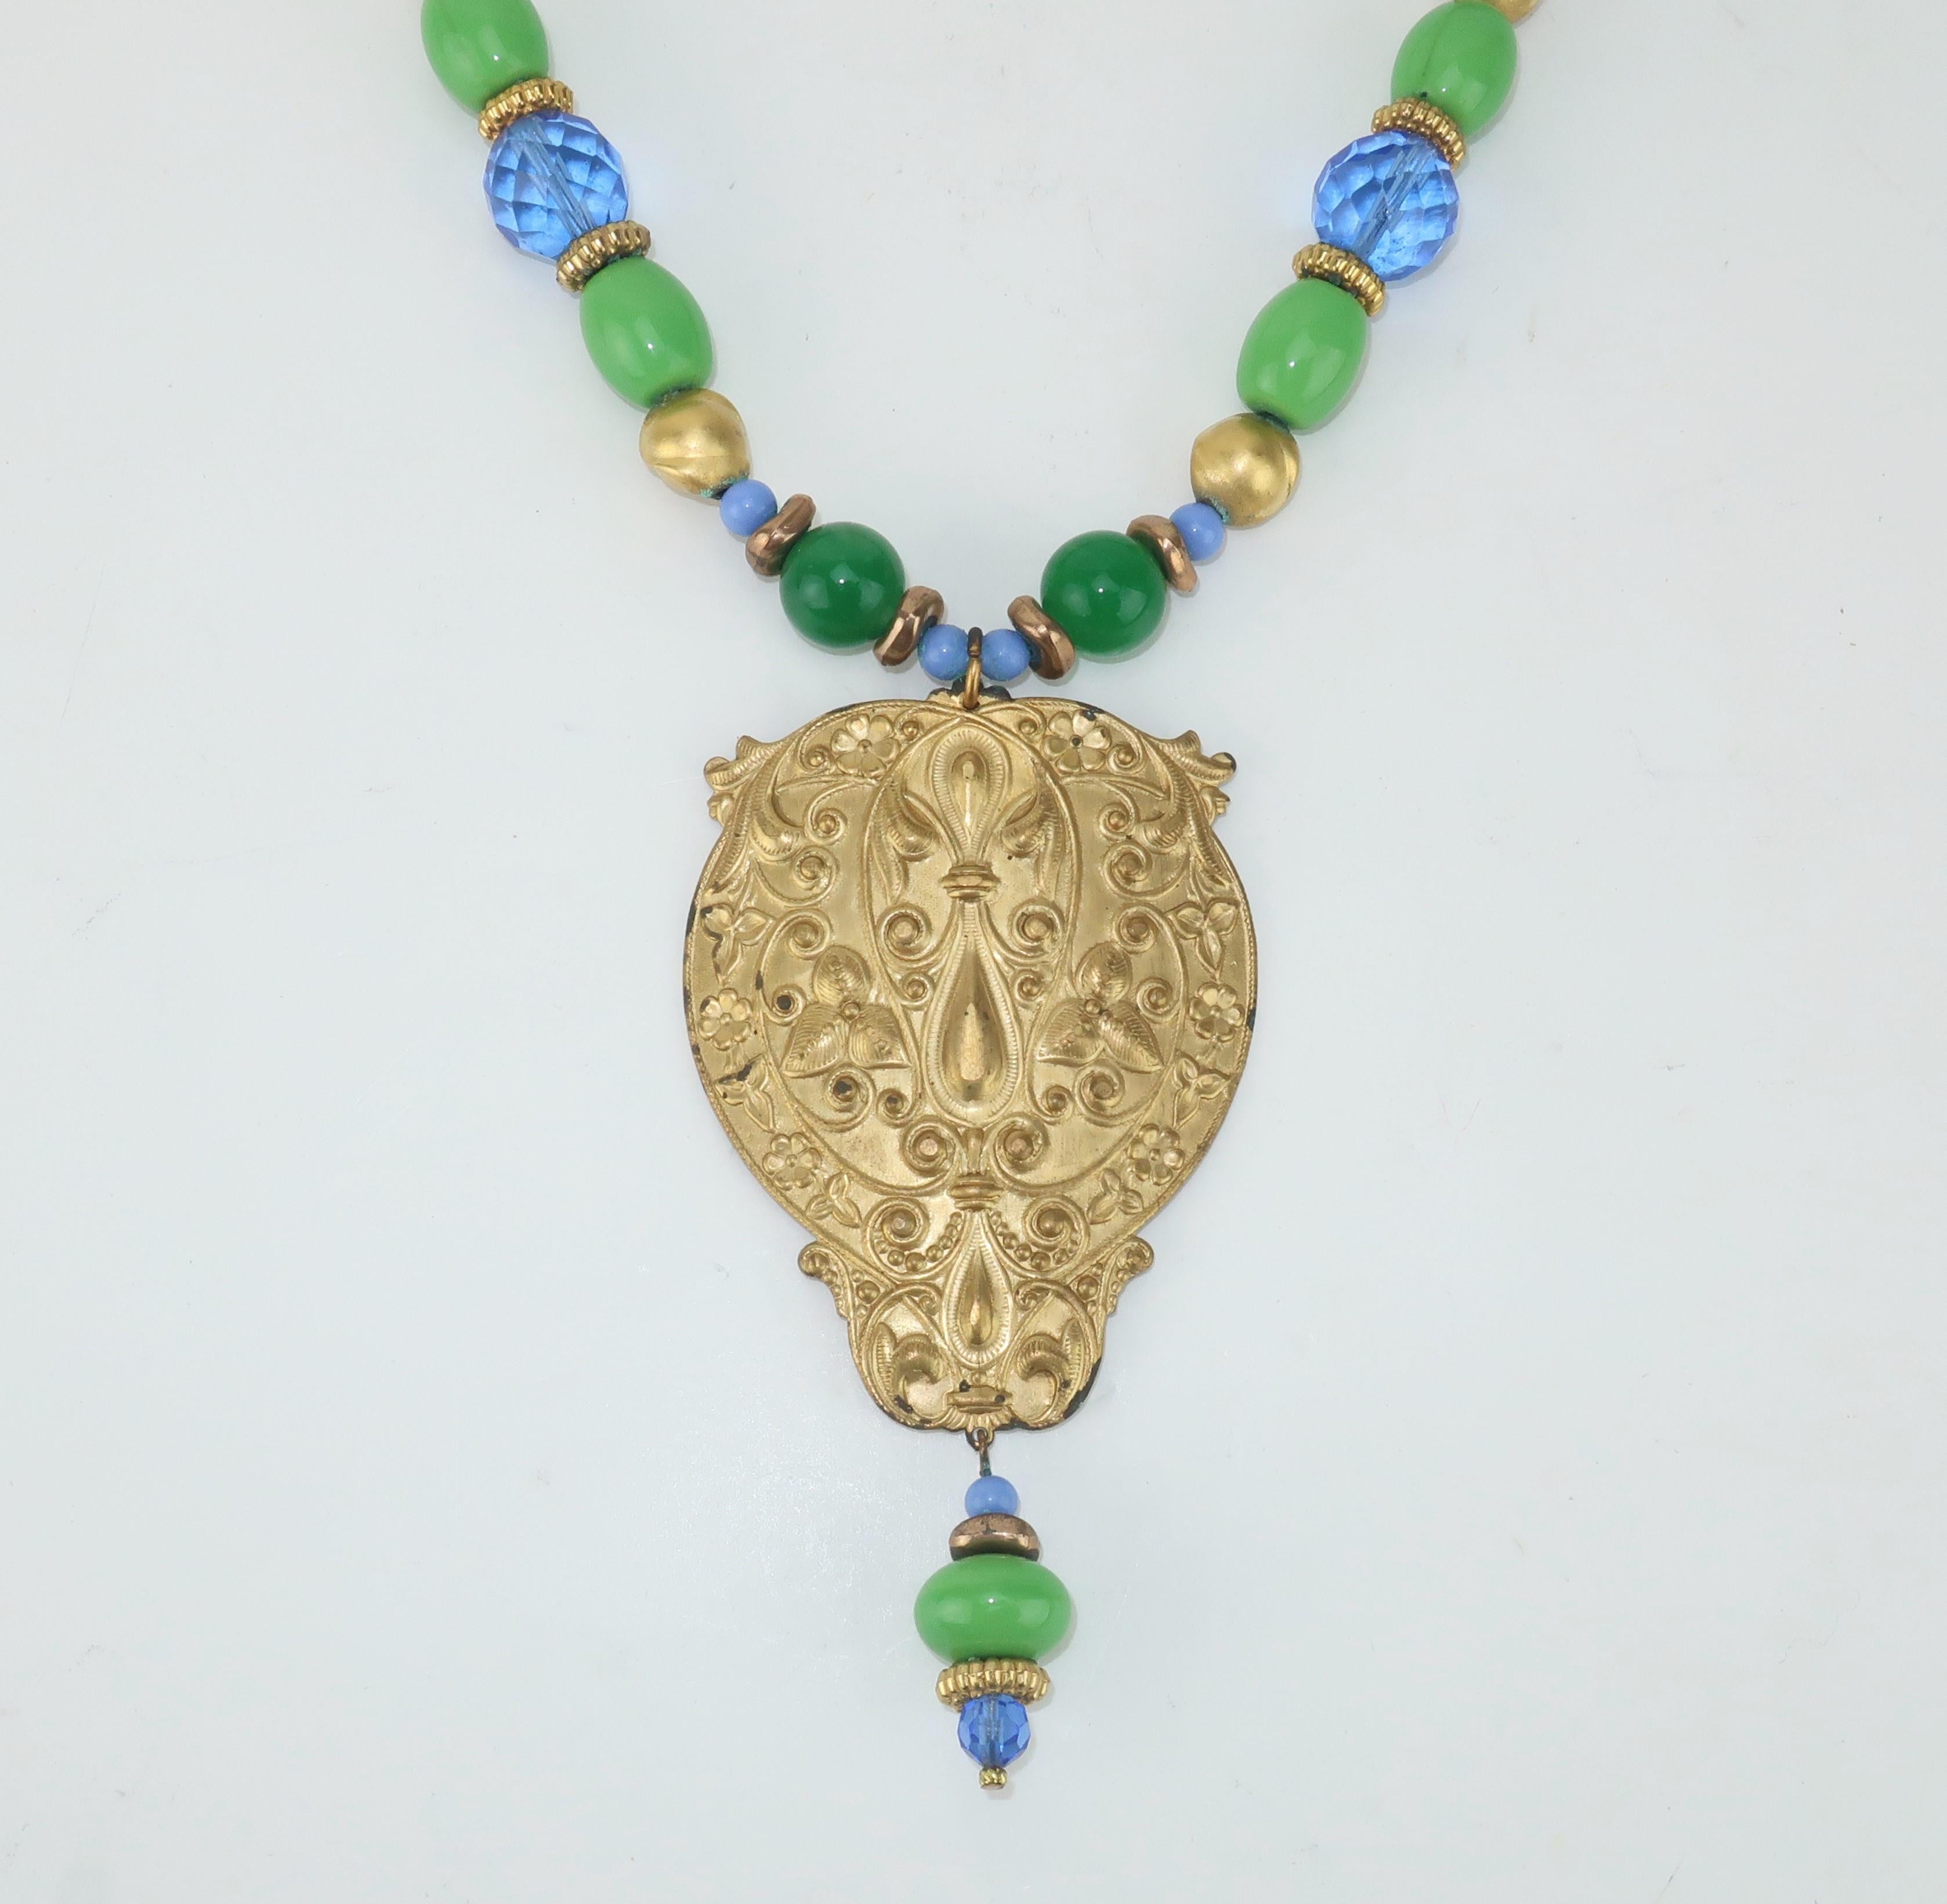 Vintage blue and green glass bead necklace with an ornate gilt metal medallion pendant.  The screw on ball closure ensures a secure fit.  No hallmark present though beautifully made with quality details.
CONDITION
Beautiful at first glance though